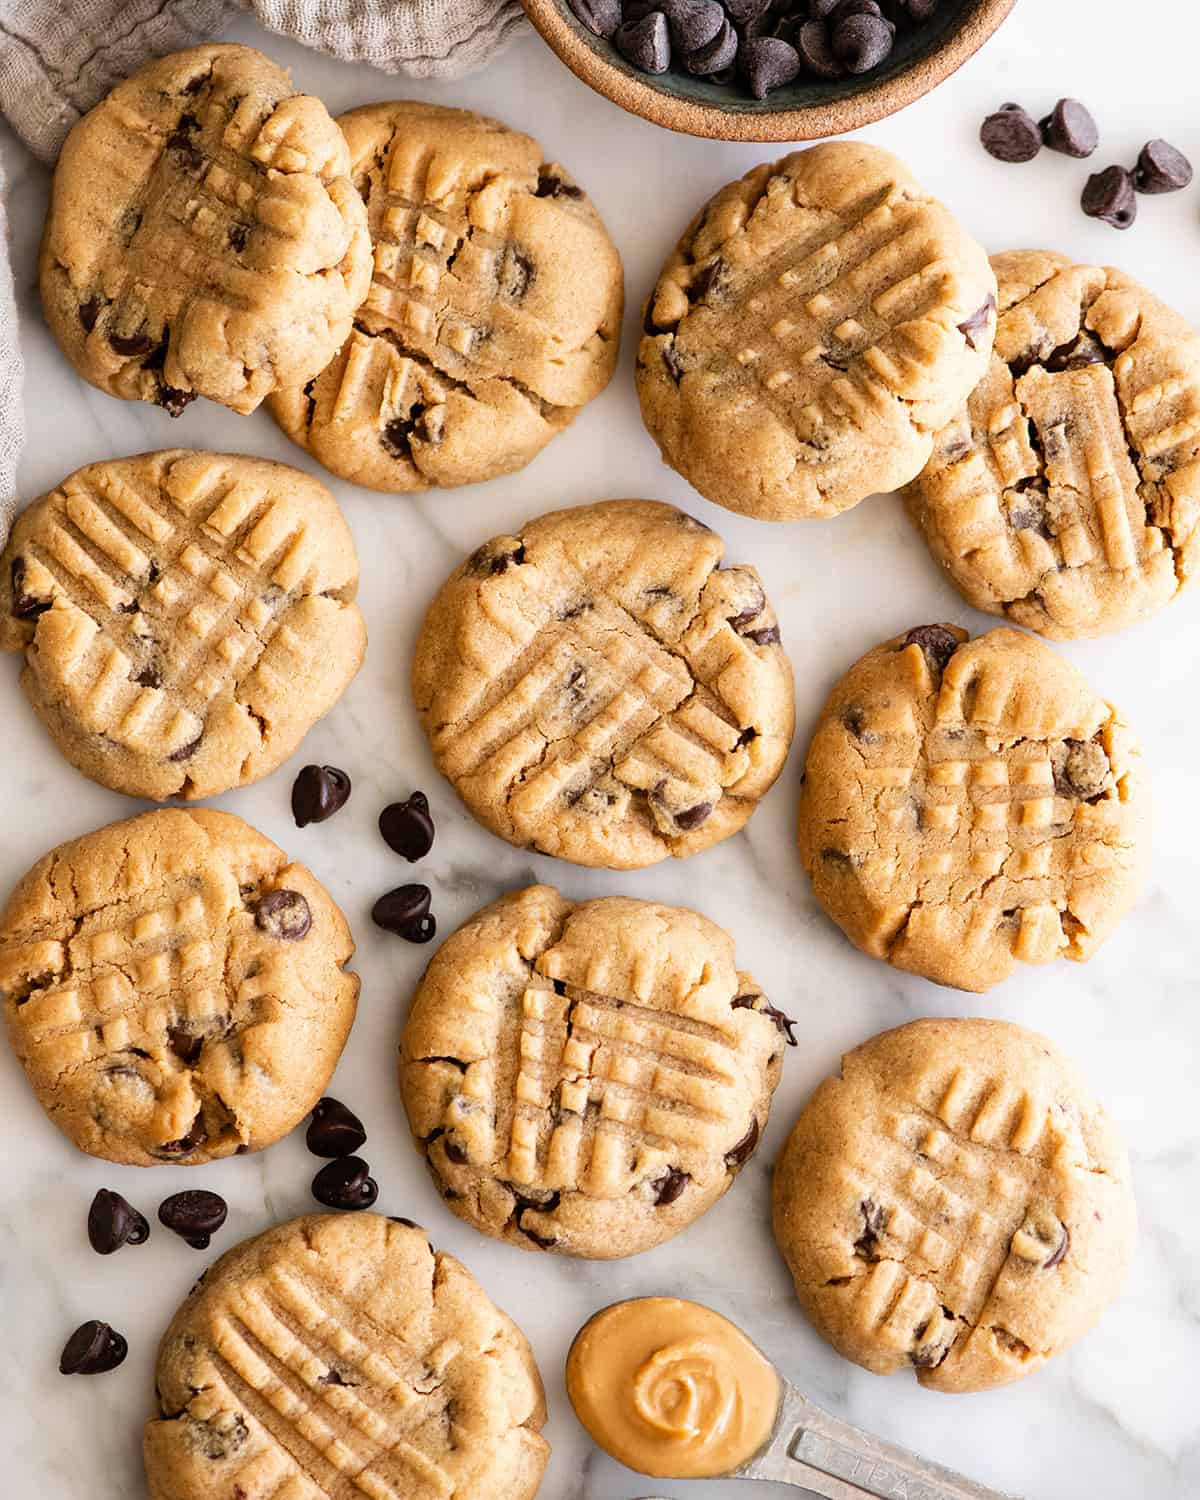 11 Peanut Butter Chocolate Chip Cookies